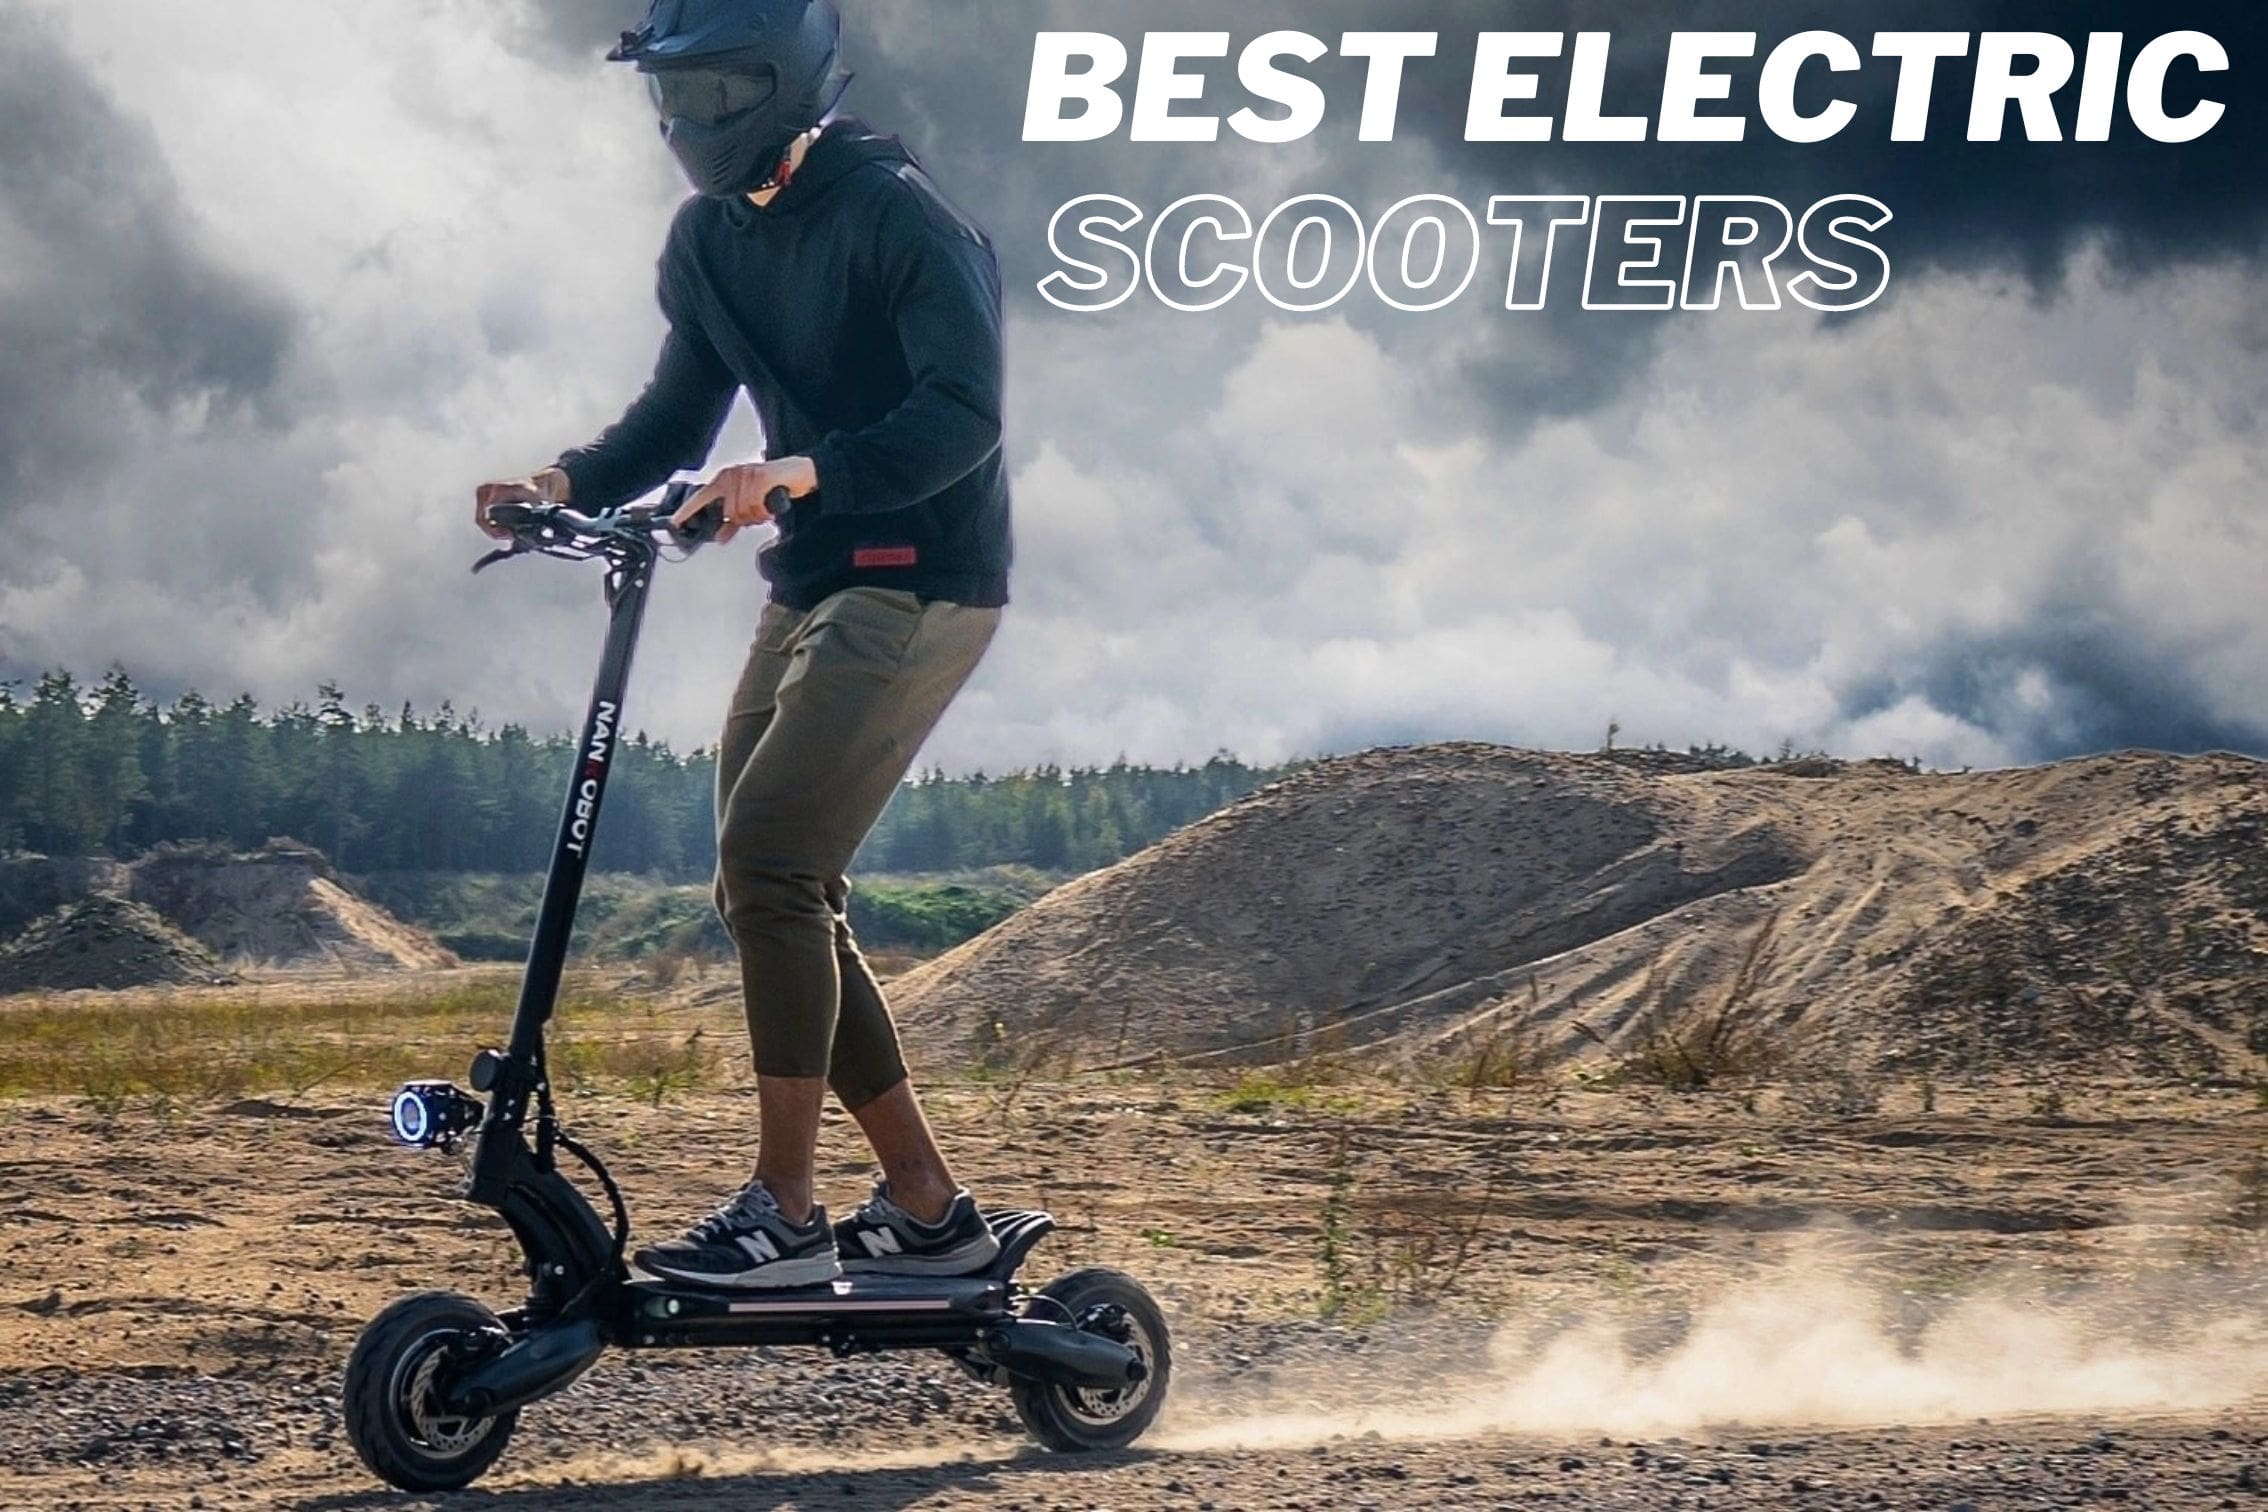 Electric Scooters | Top E-Scooter Brands | Customer Reviews – Page 3 Electric Boarding Company ™